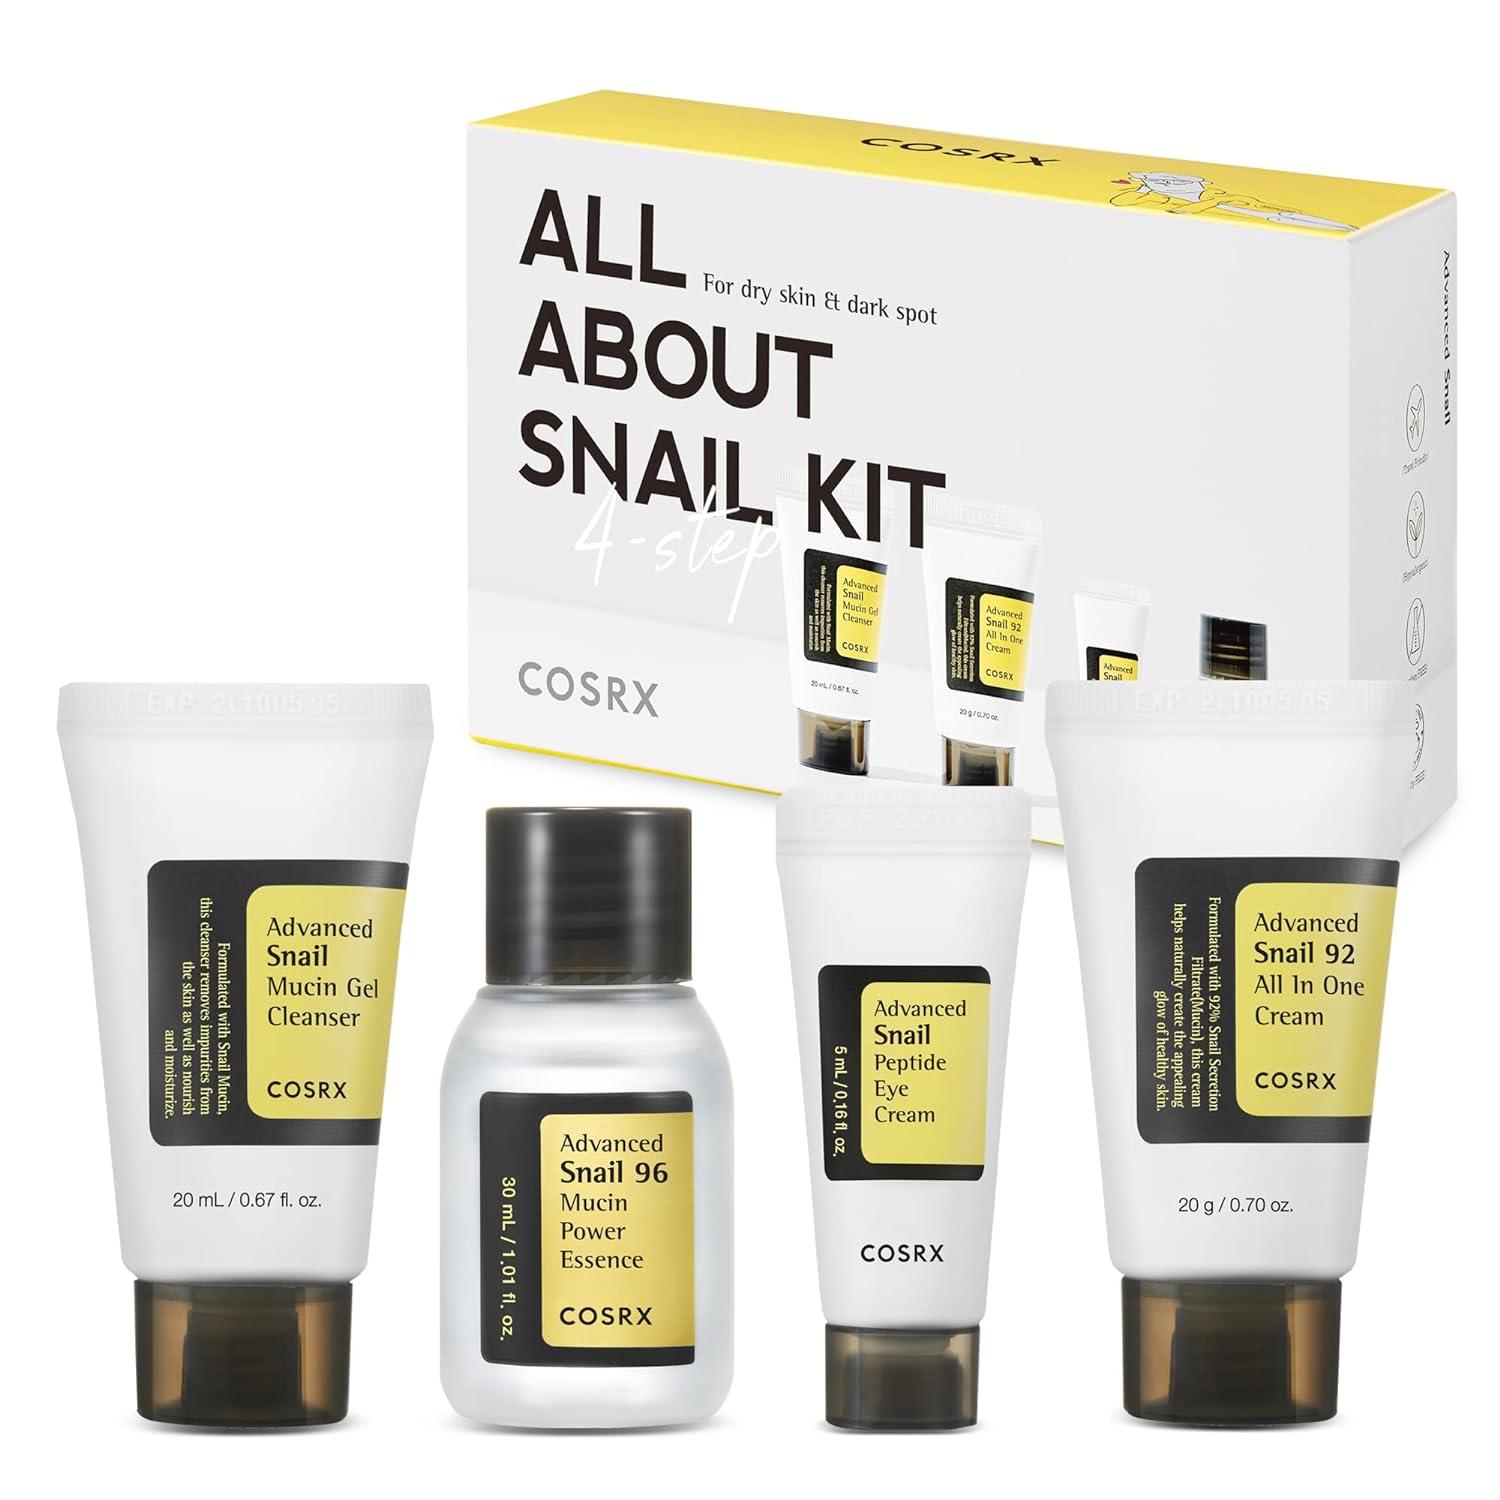 Cosrx All About Snail Korean Skincare Travel Size for $15.17